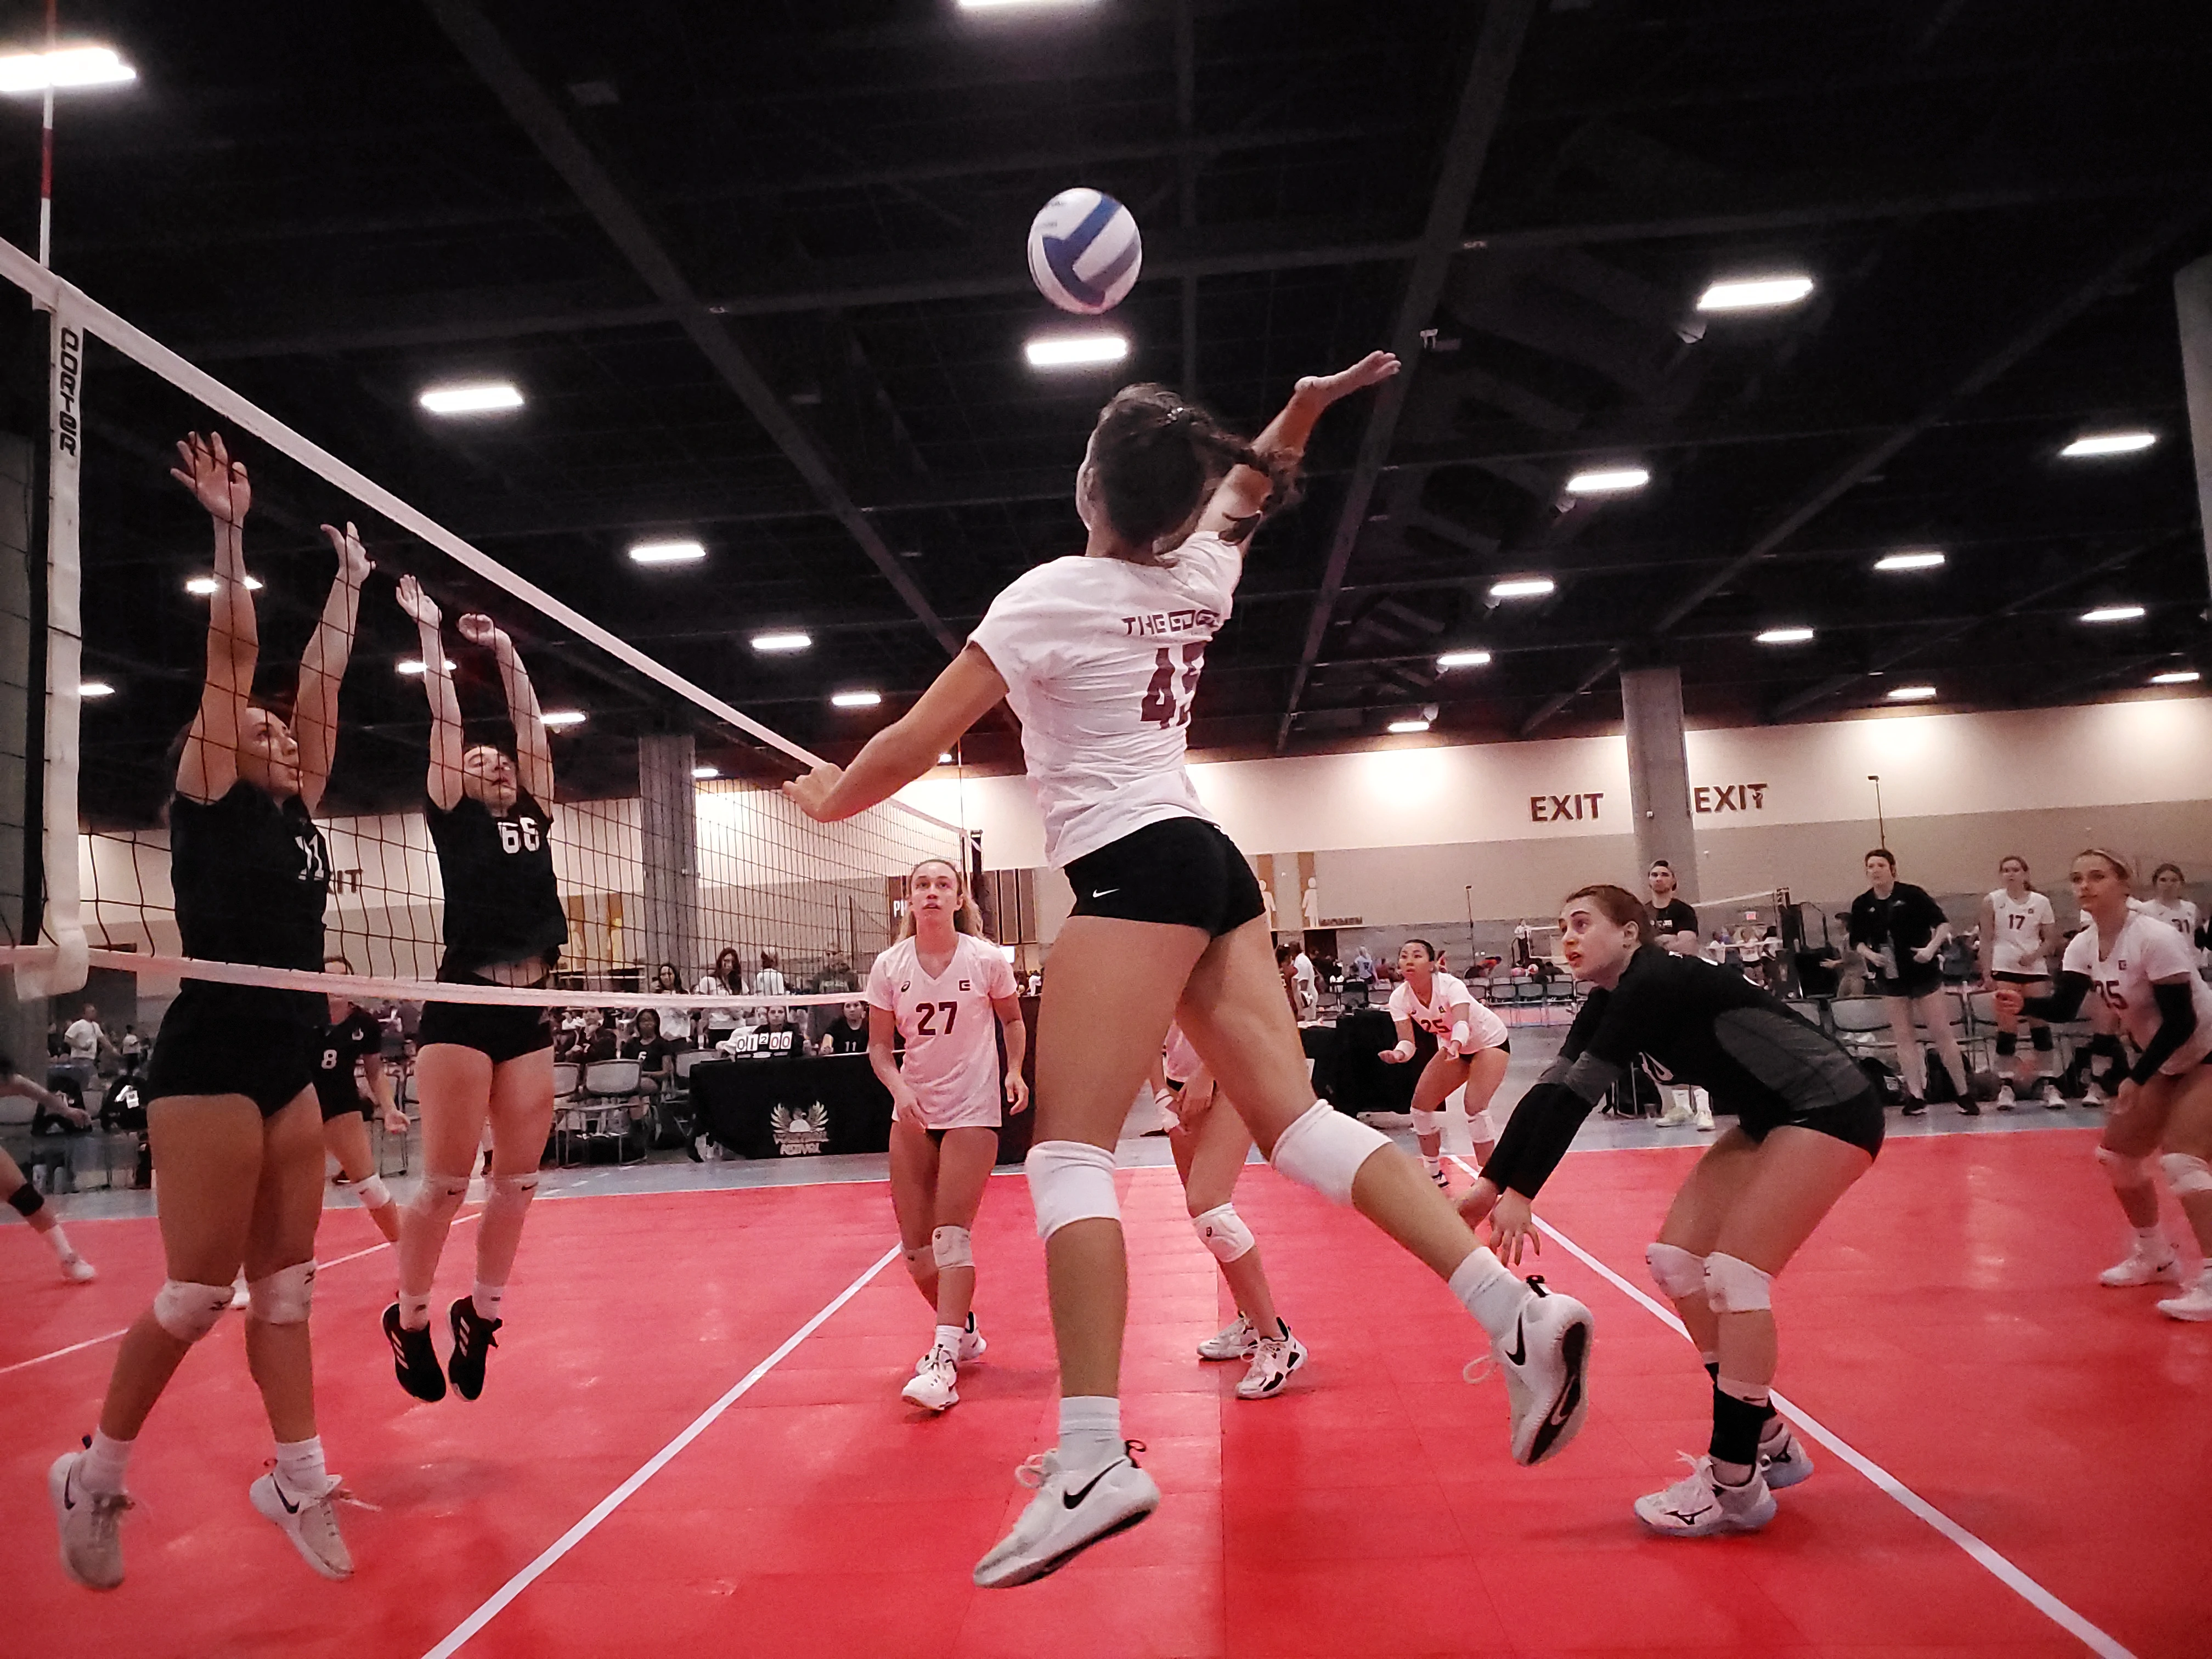 An Edge athlete mid-air primed and ready to hit a ball over an block